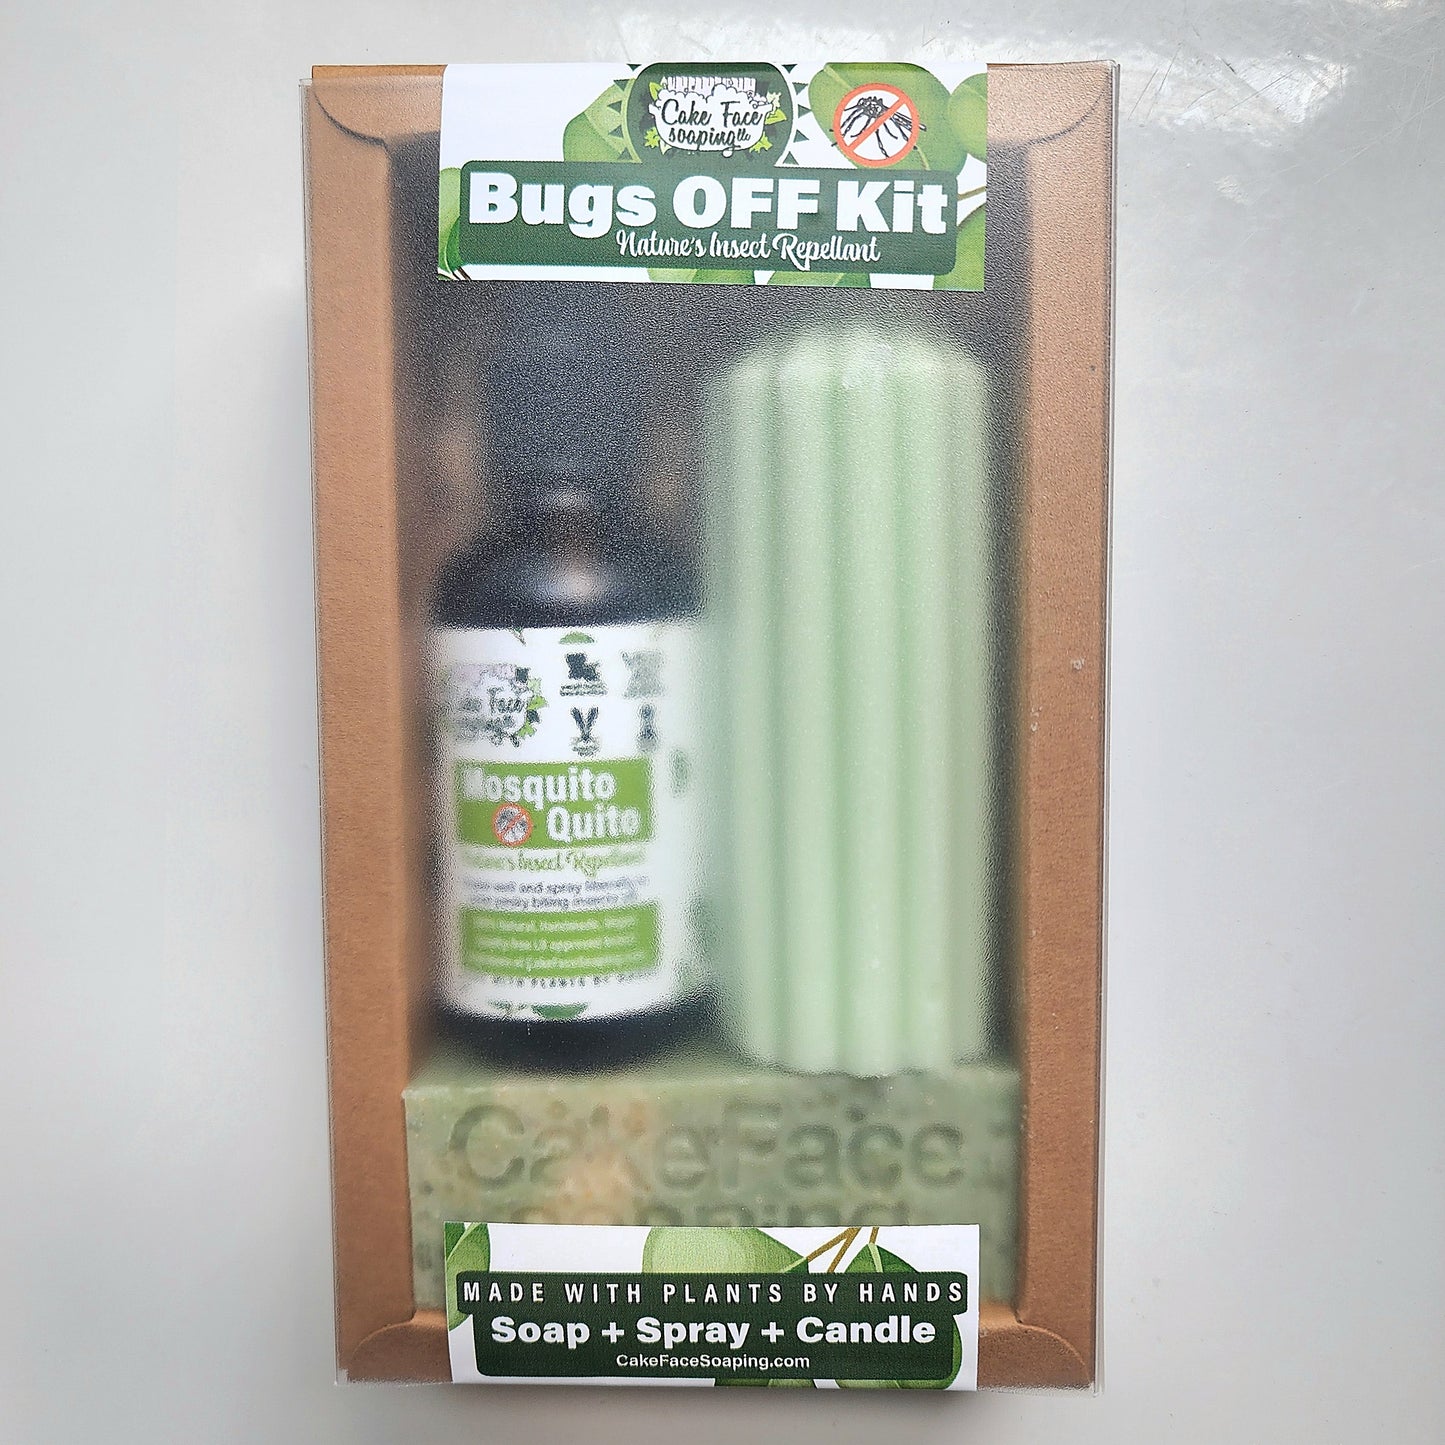 Bugs OFF Kit with Spray